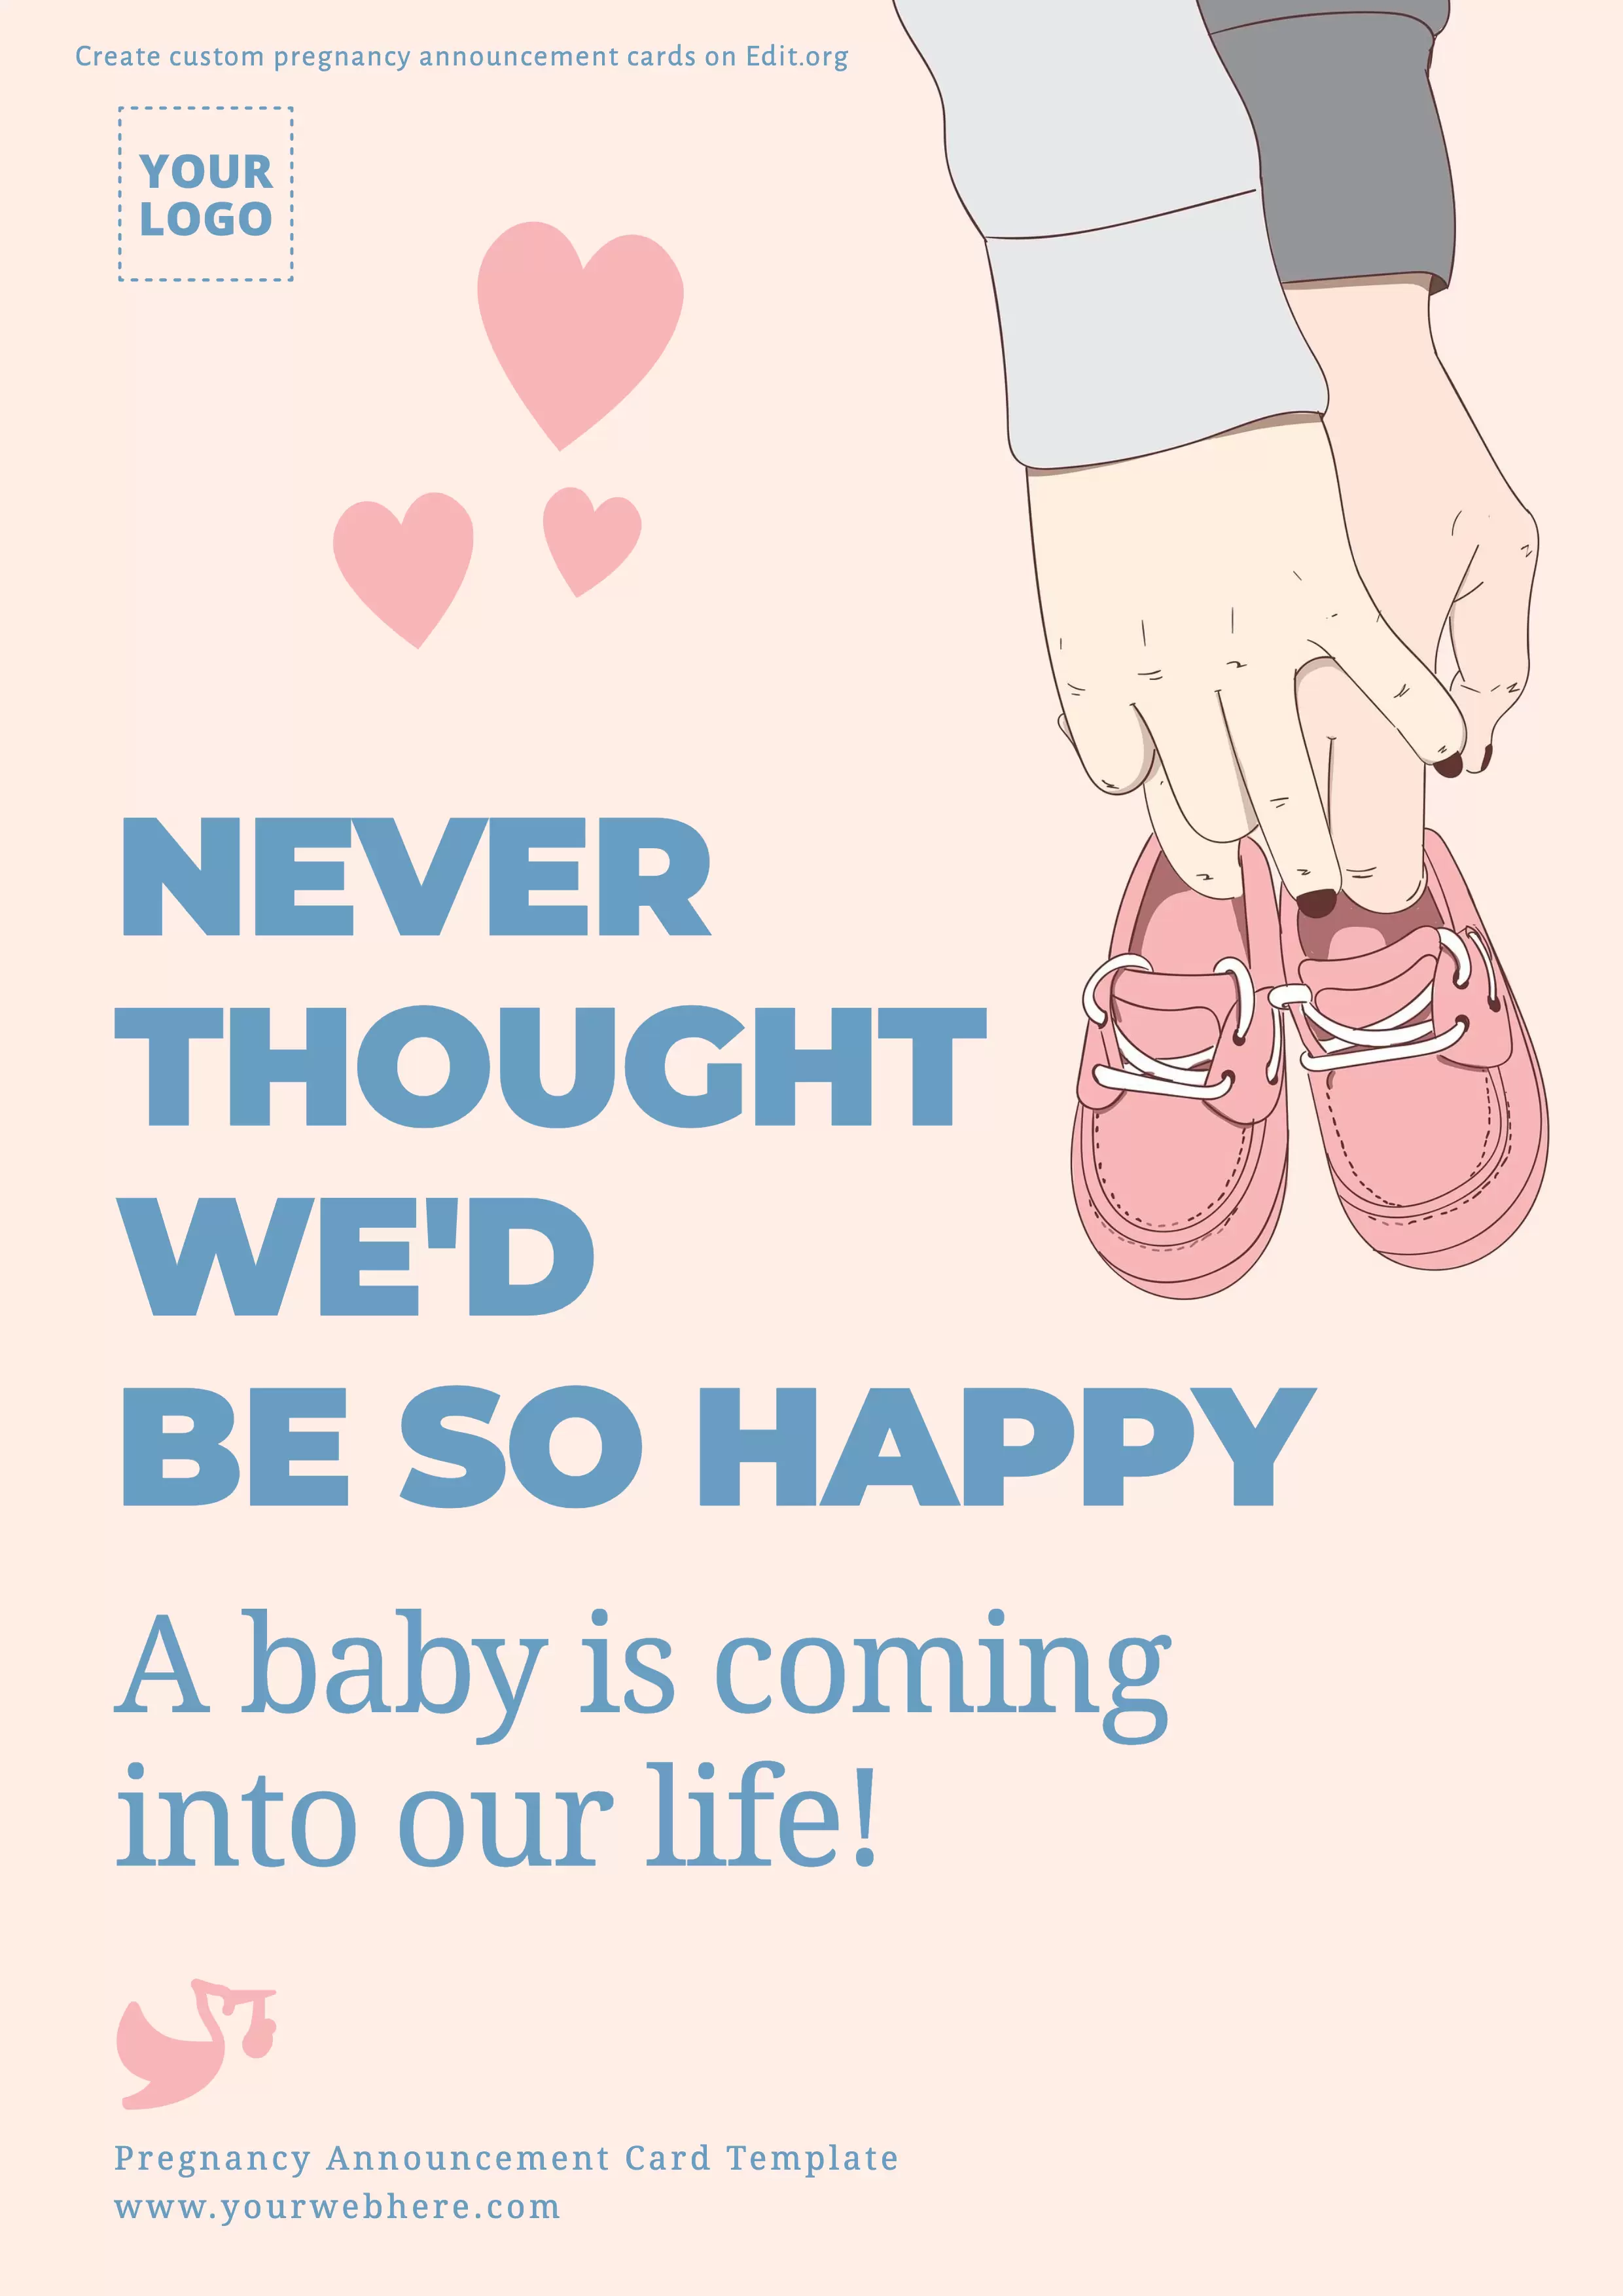 Free and customizable pregnancy templates